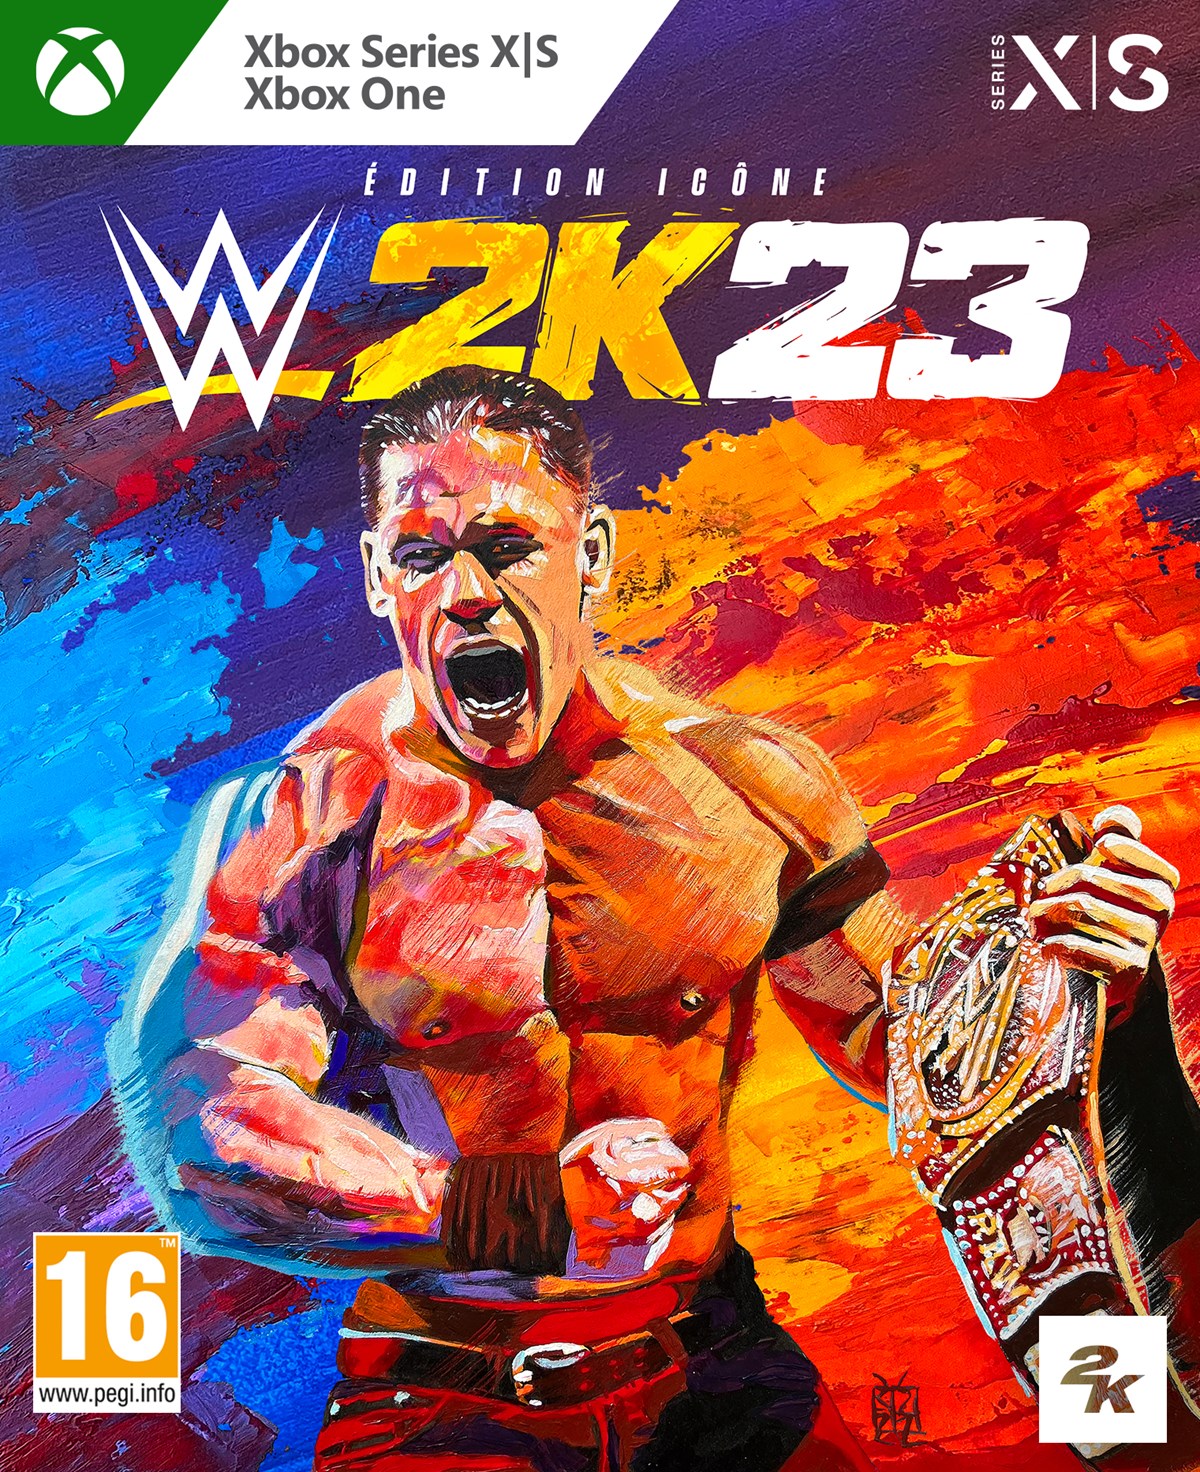 2K WWE 2K23 Packaging Édition Icône Xbox One Xbox Series XIS FR (A plat)